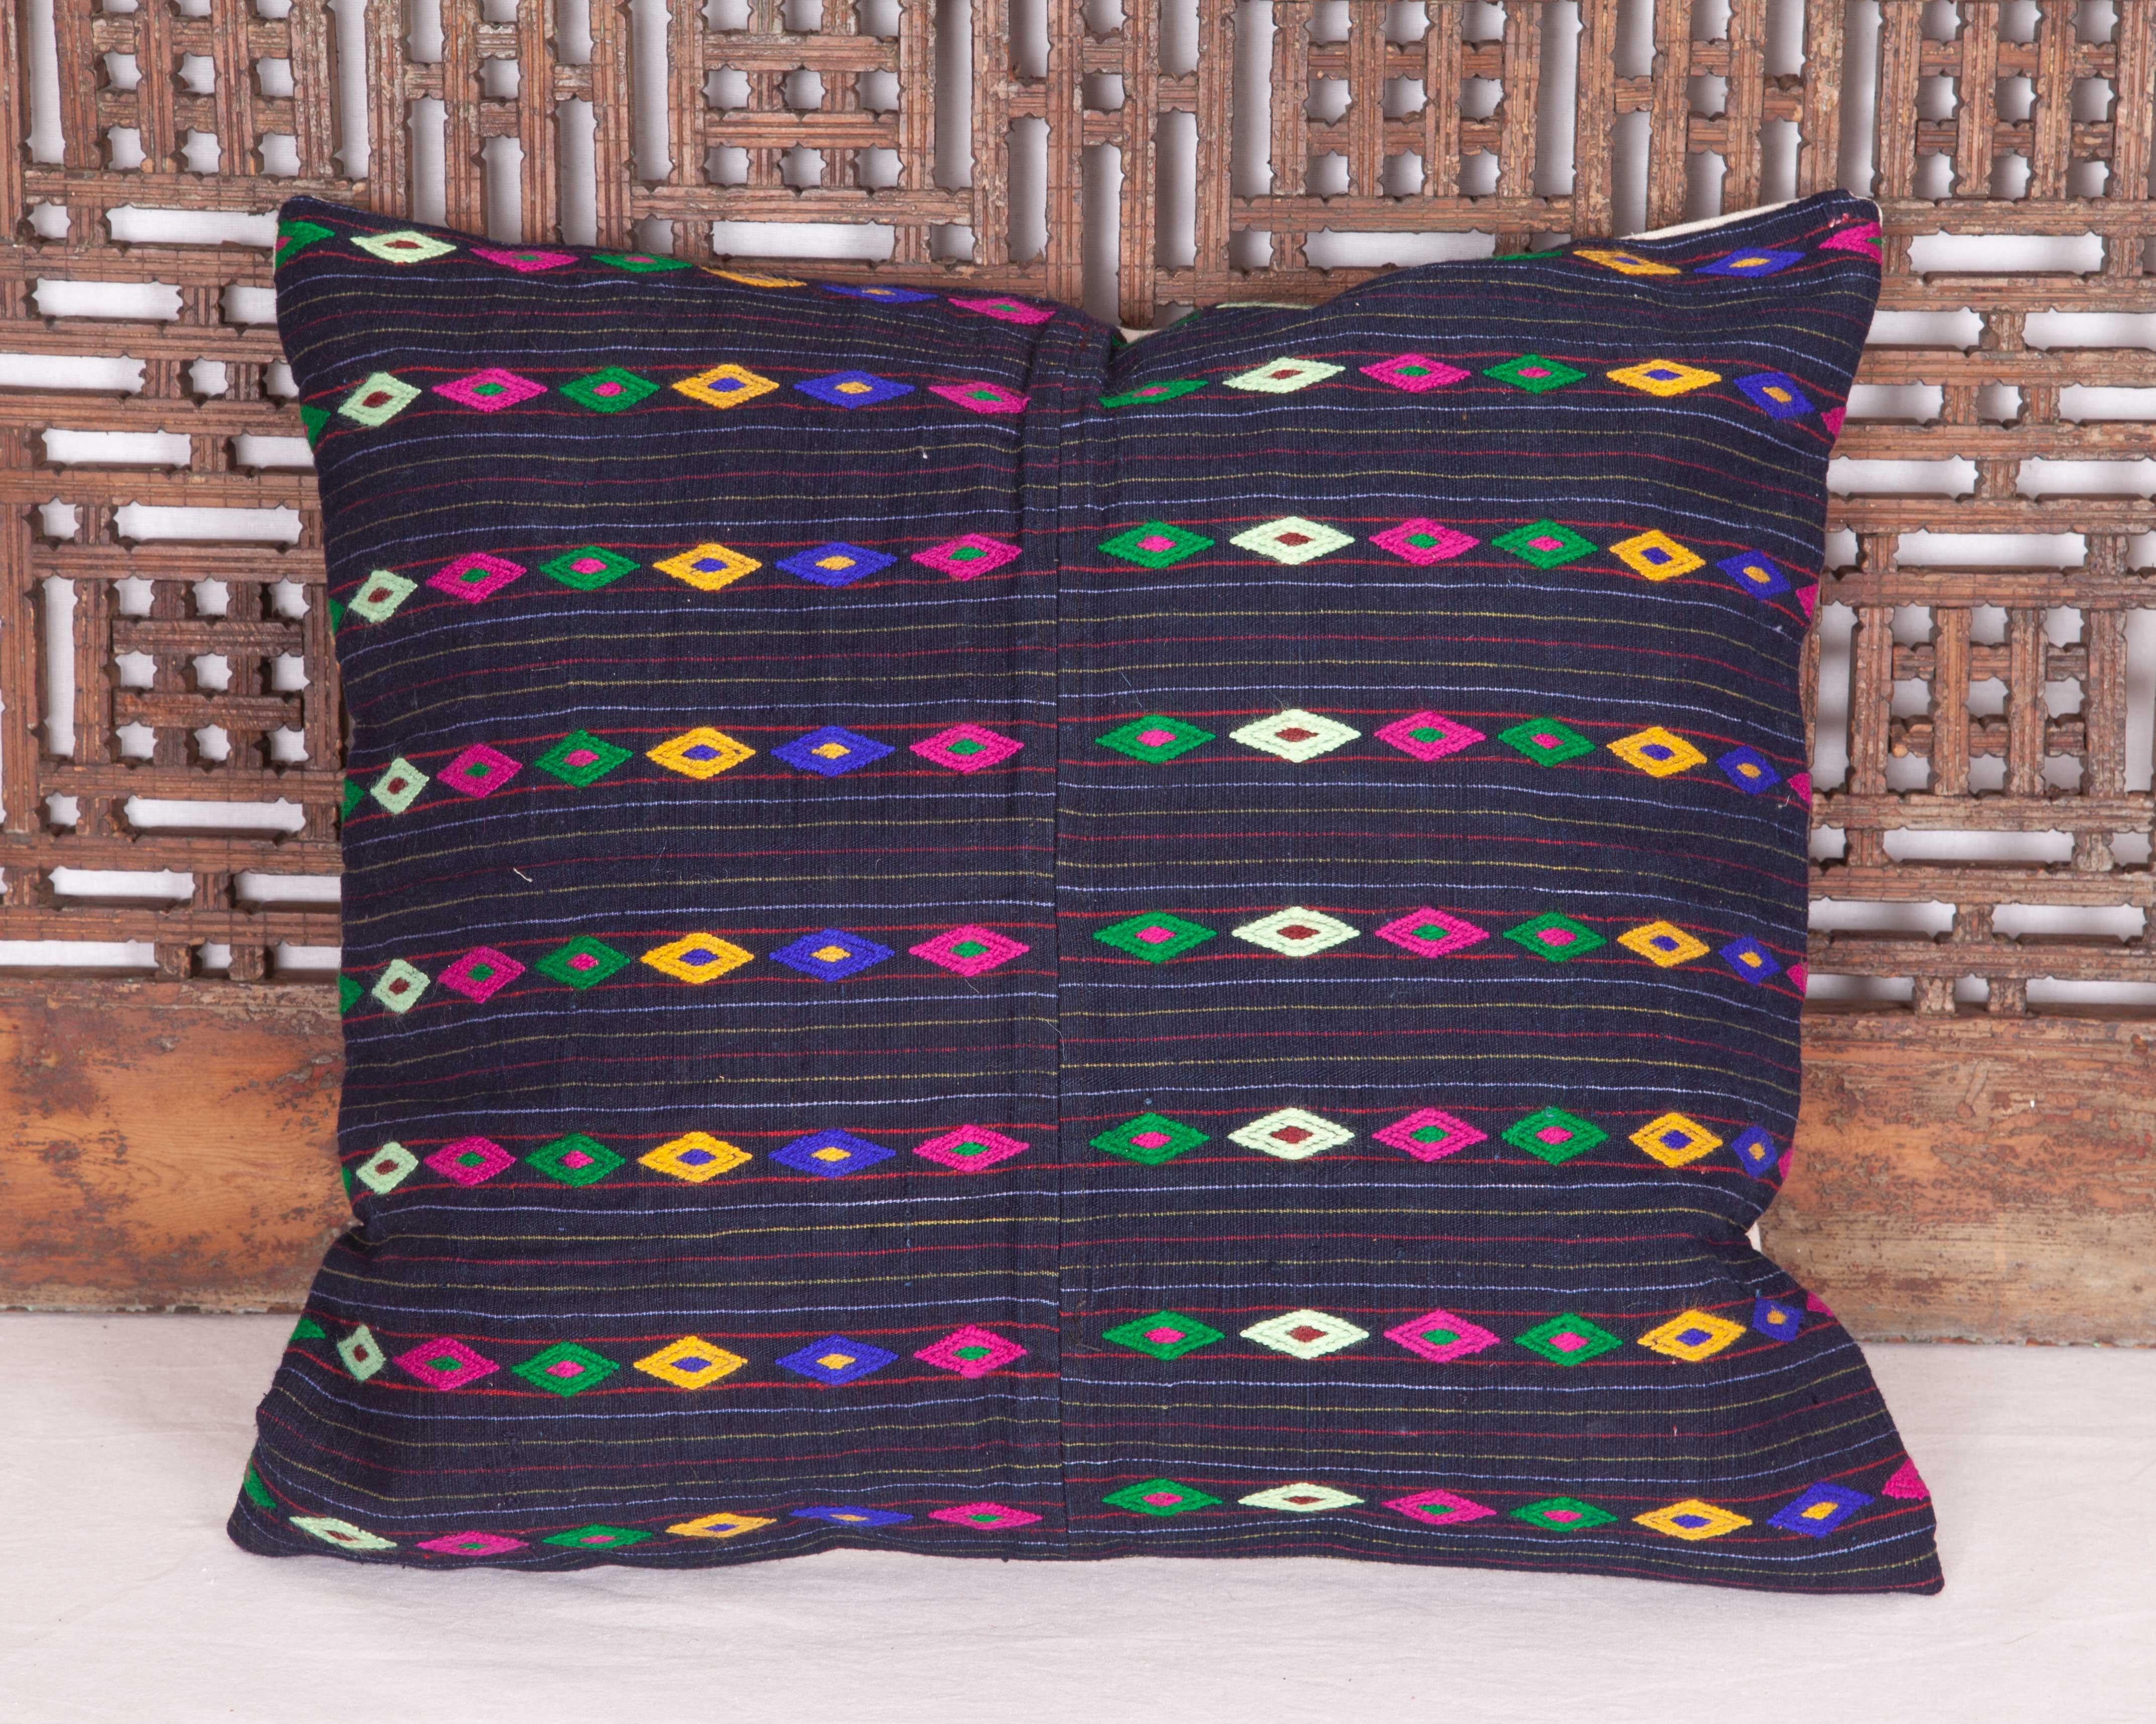 Embroidered Pillow Case Fashioned from a Mid-20th Century Anatolian Cotton Apron For Sale